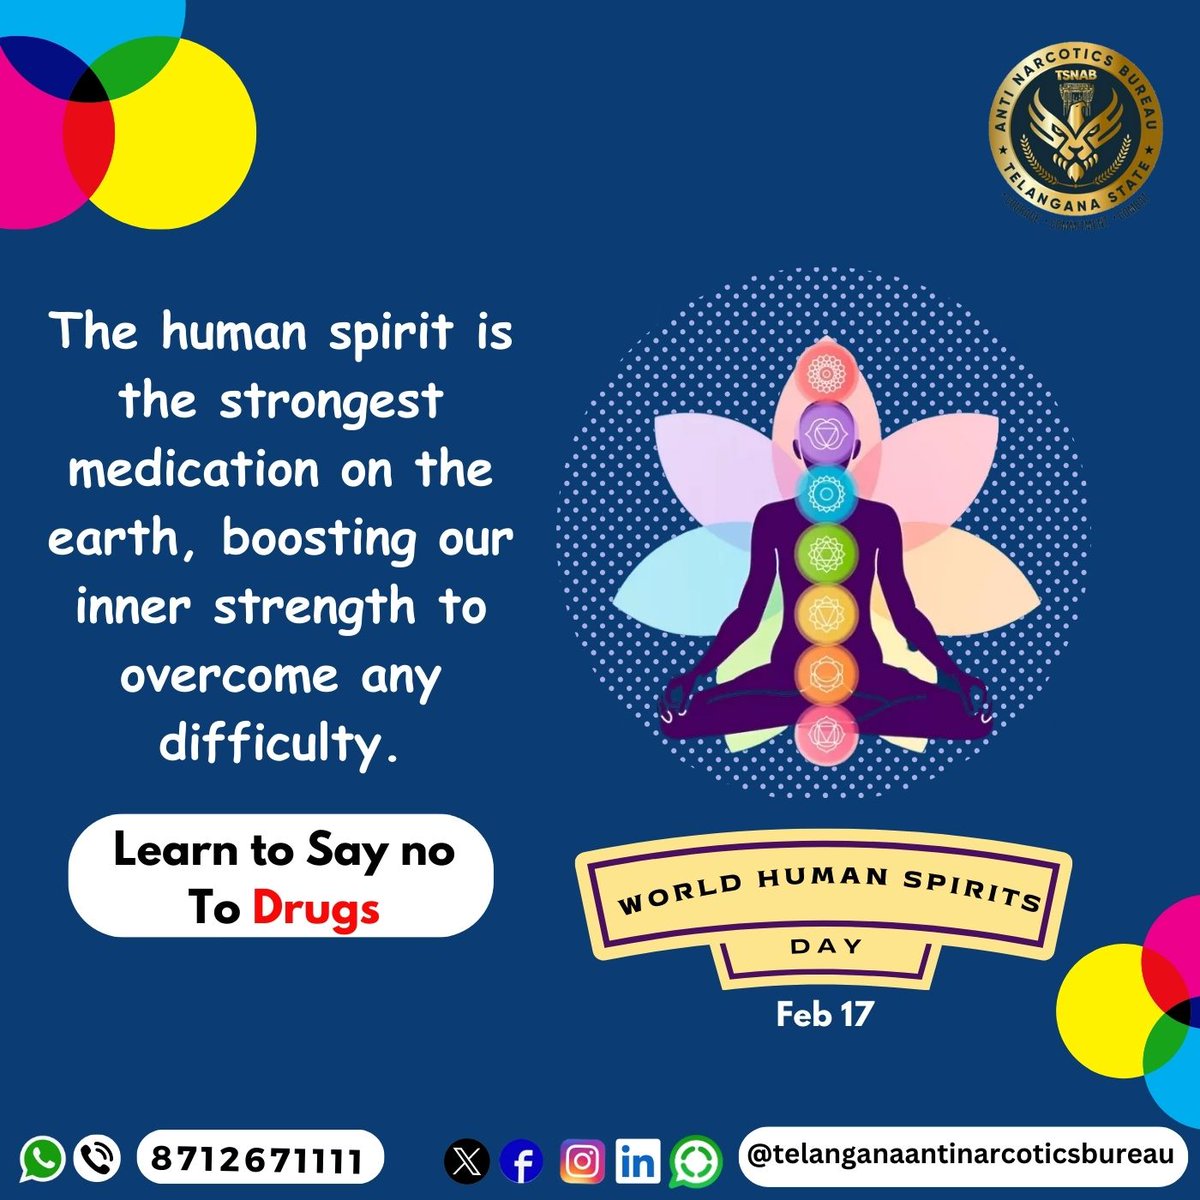 The human spirit is the strongest #medication on the earth, boosting our inner strength to overcome any difficulty. @TelanganaDGP @director_tsnab @CVAnandIPS @narcoticsbureau @RachakondaCop #tsnab #DrugfreeTelangana #nodrugsnoregrets #TelanganaAntiNarcoticsBureau #TelanganaPolice